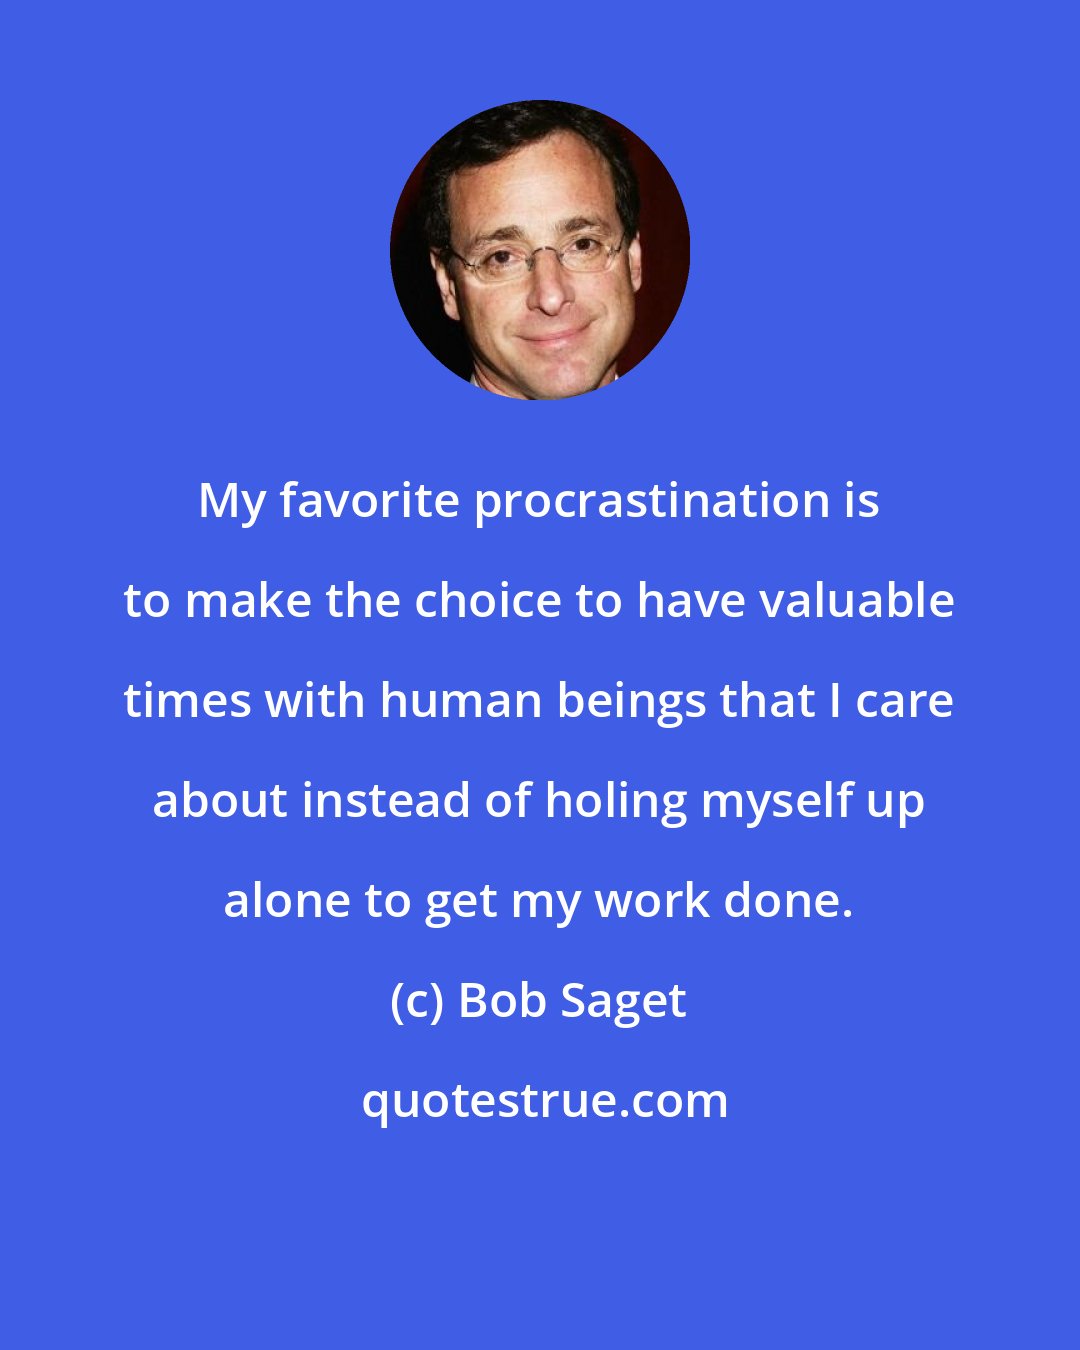 Bob Saget: My favorite procrastination is to make the choice to have valuable times with human beings that I care about instead of holing myself up alone to get my work done.